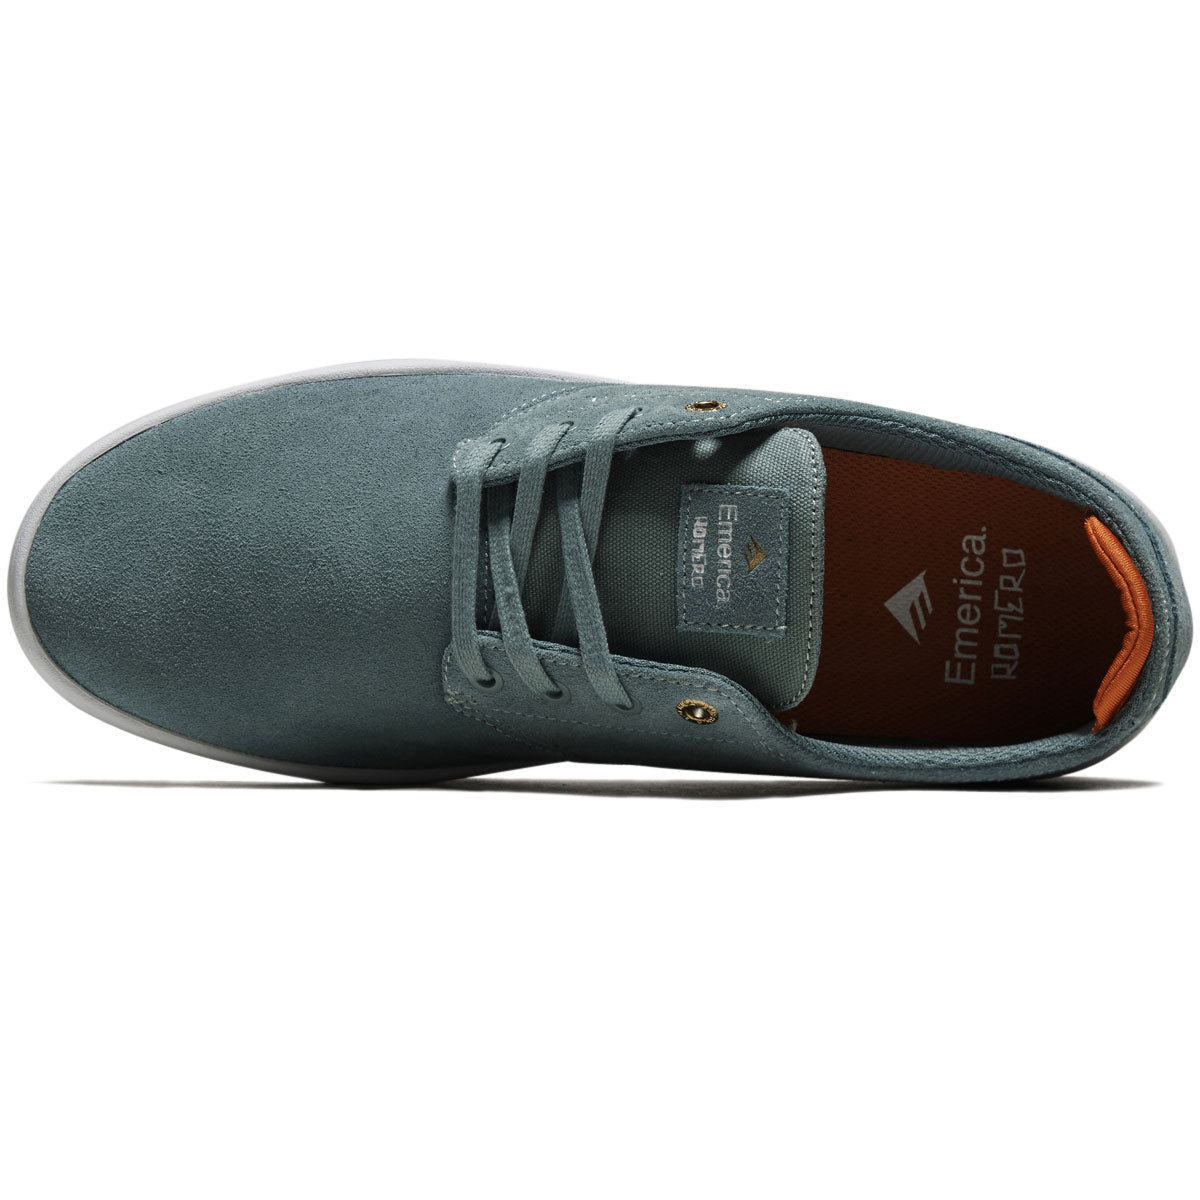 Emerica Romero Laced Shoes - Dusty Blue image 3